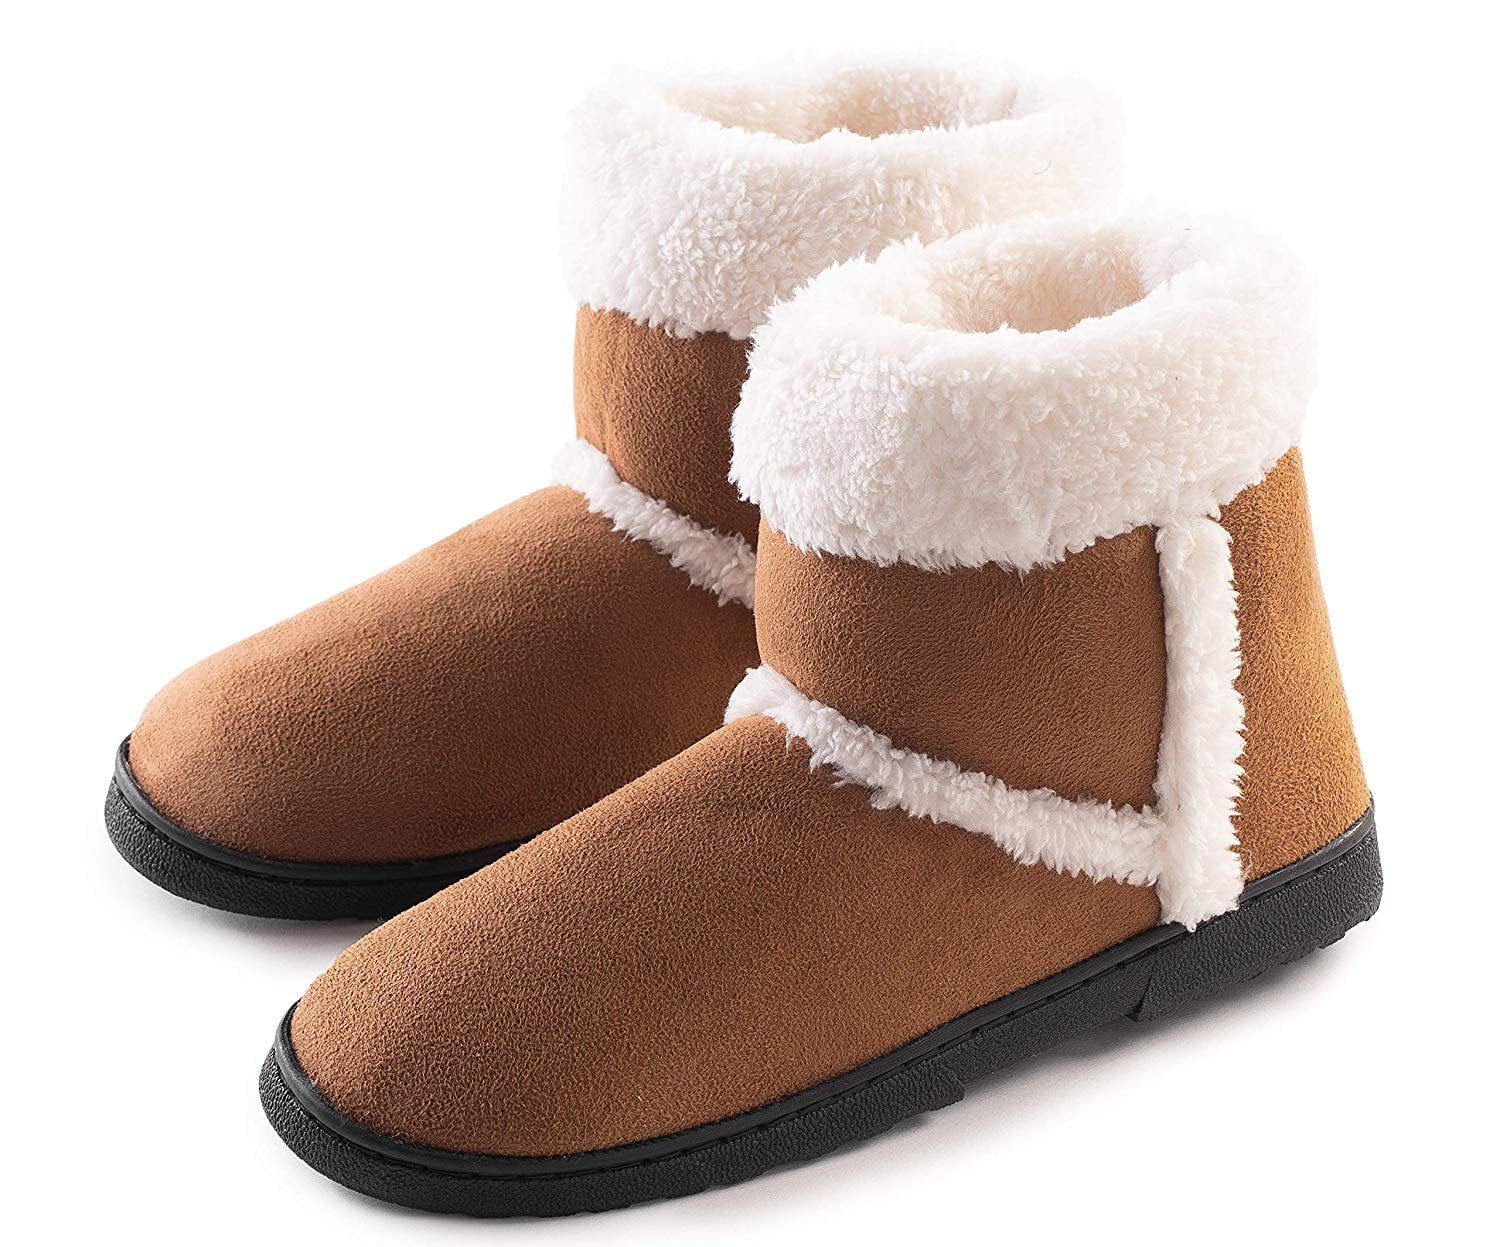 MENS SLIPPERS NEW ANKLE FLEECE WARM LINED NORDIC WINTER FUR BOOTS SHOES SIZE 